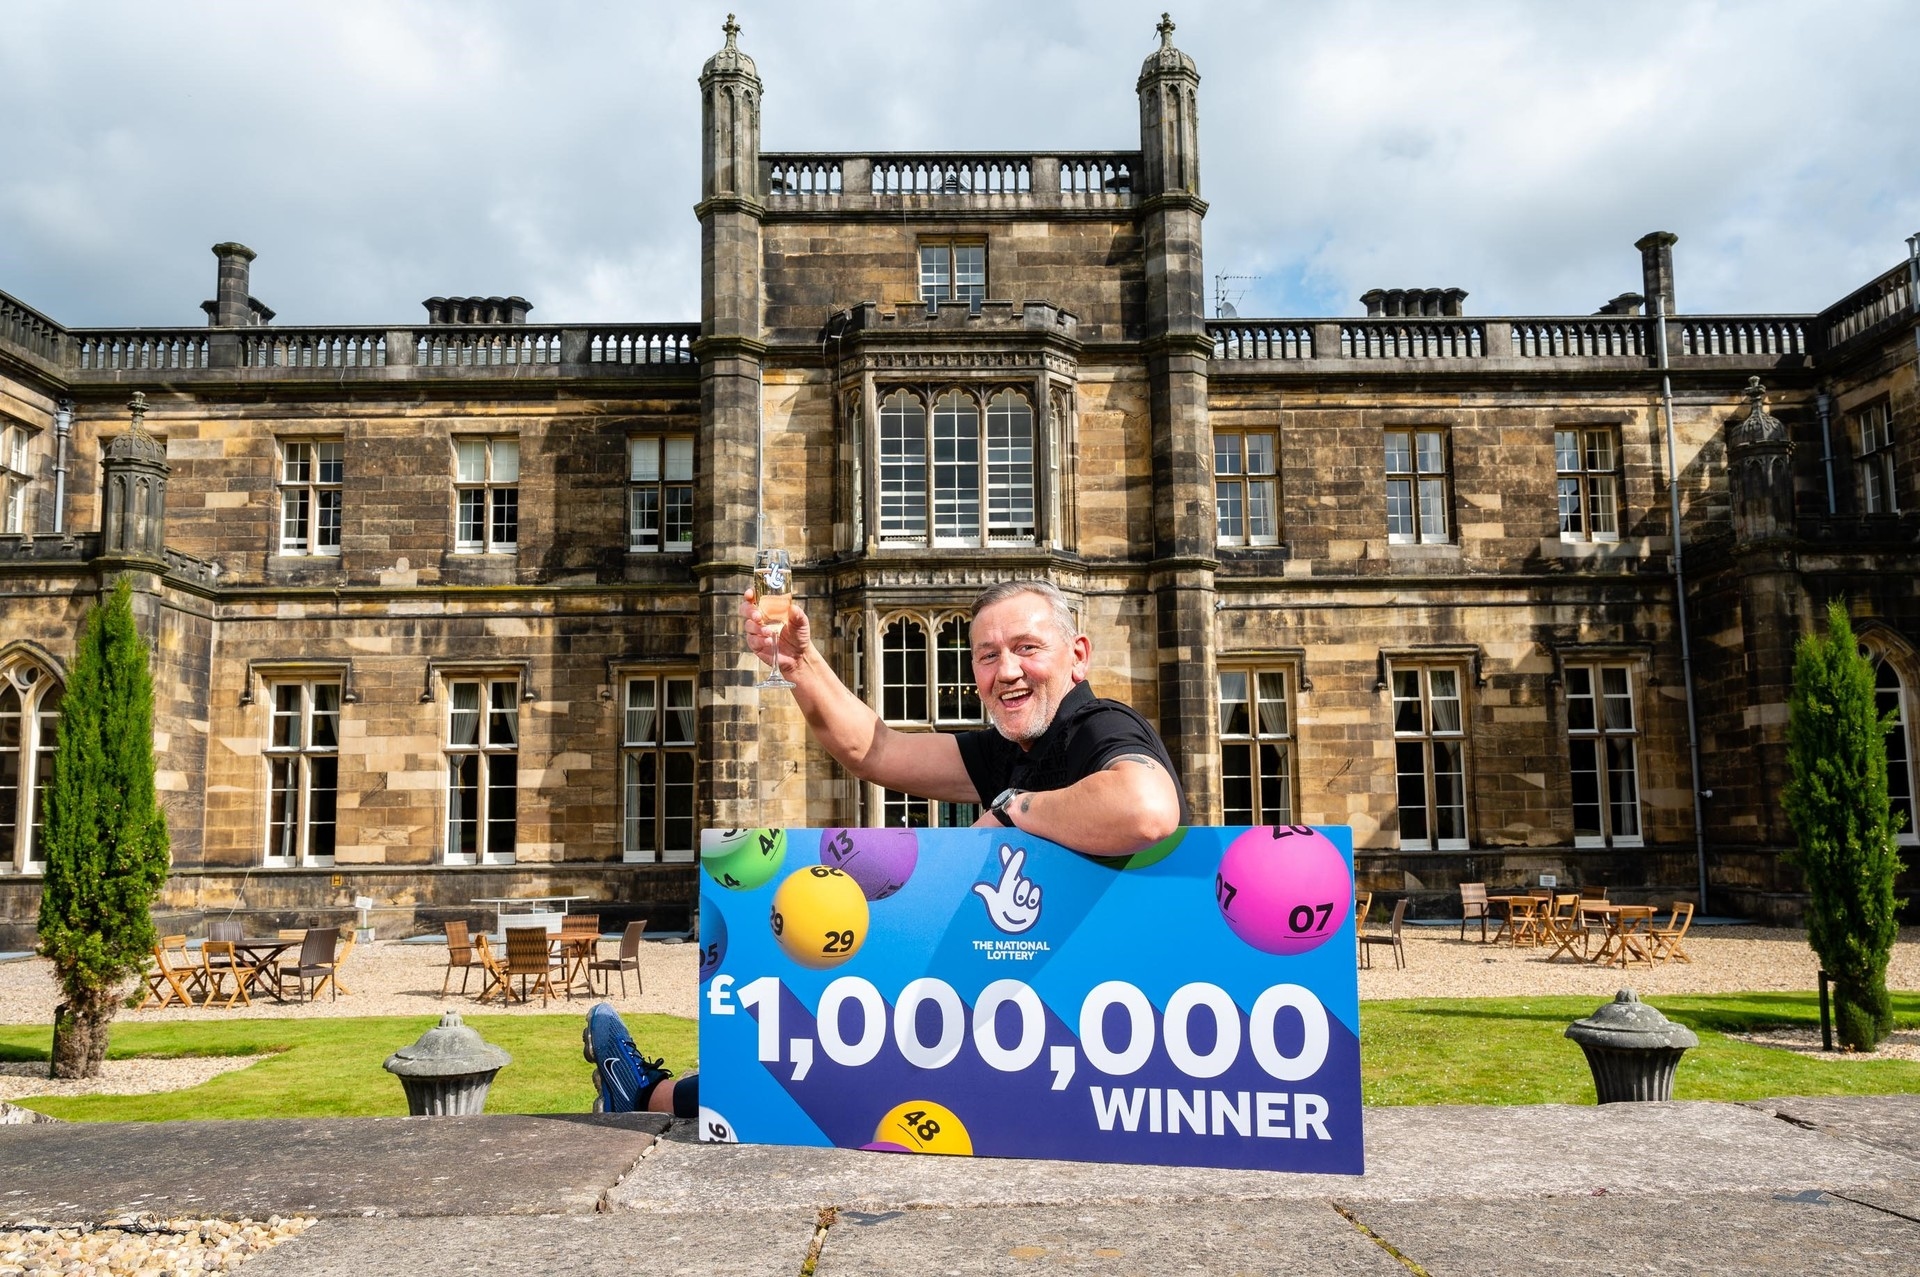 Robert Cameron, 53, won £1m in the lottery after he followed the advice of his late mother 